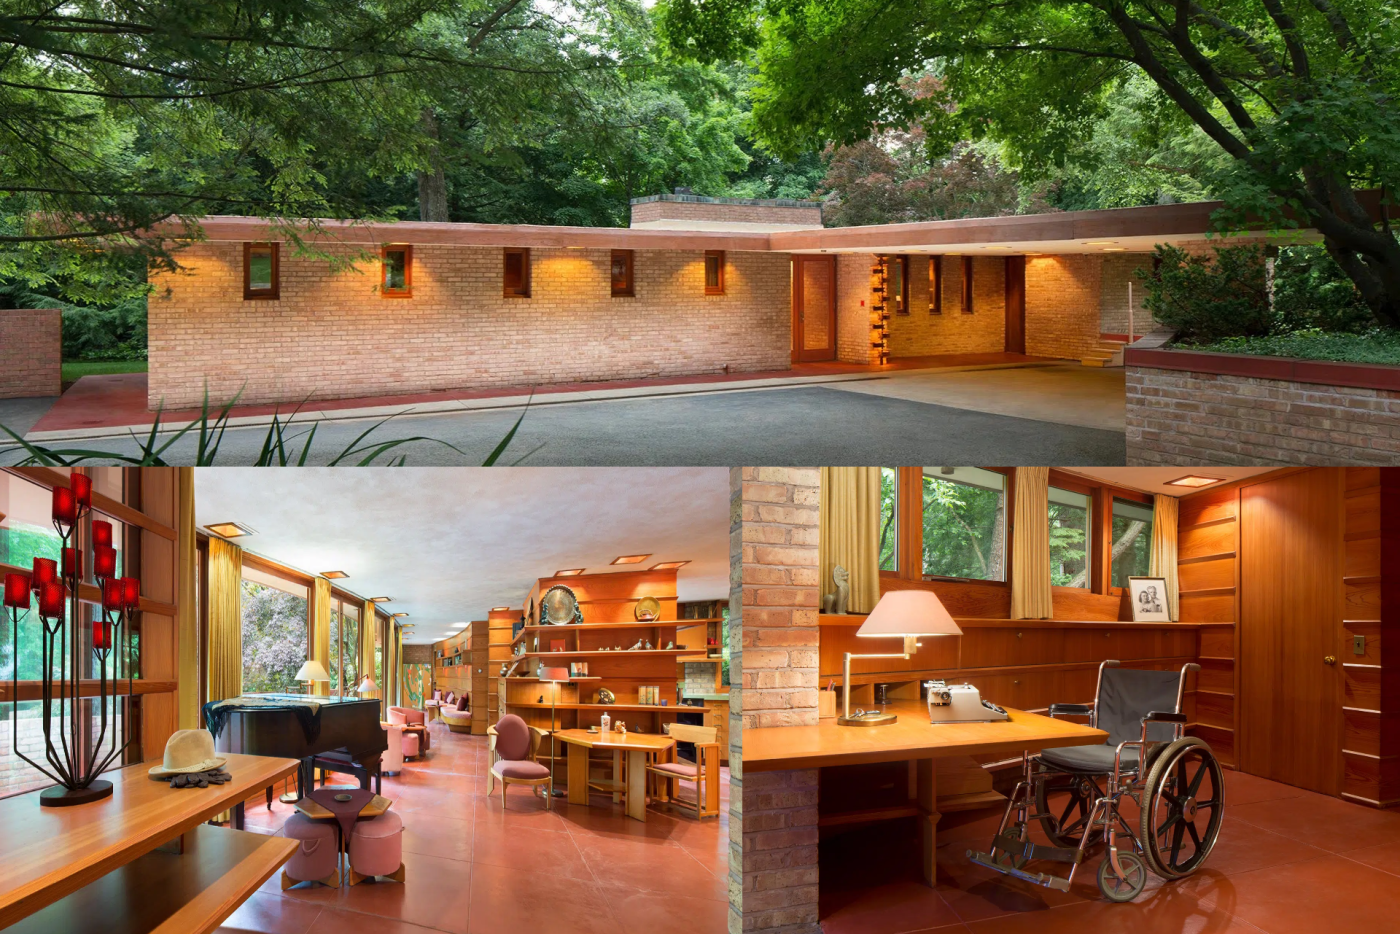 Photos of the front (top) and interior (bottom) of the Illinois house designed by architect Frank Lloyd Wright for Navy Veteran Kenneth Laurent after World War II. Laurent was left paralyzed by a tumor on his spinal cord. (laurenthouse.com)